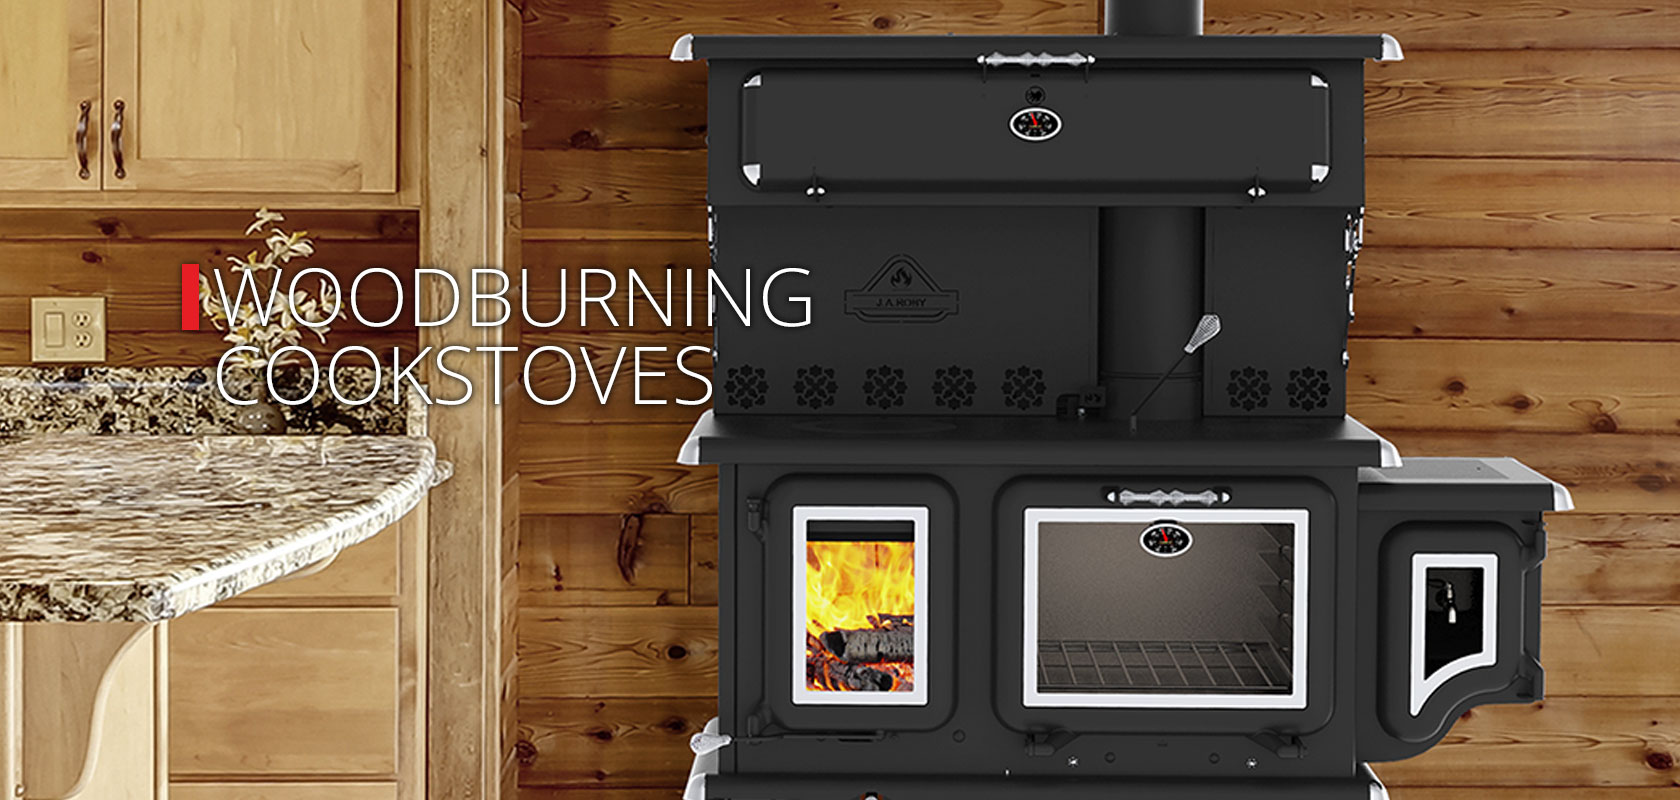 Woodburning cookstove - J. A. ROBY inc